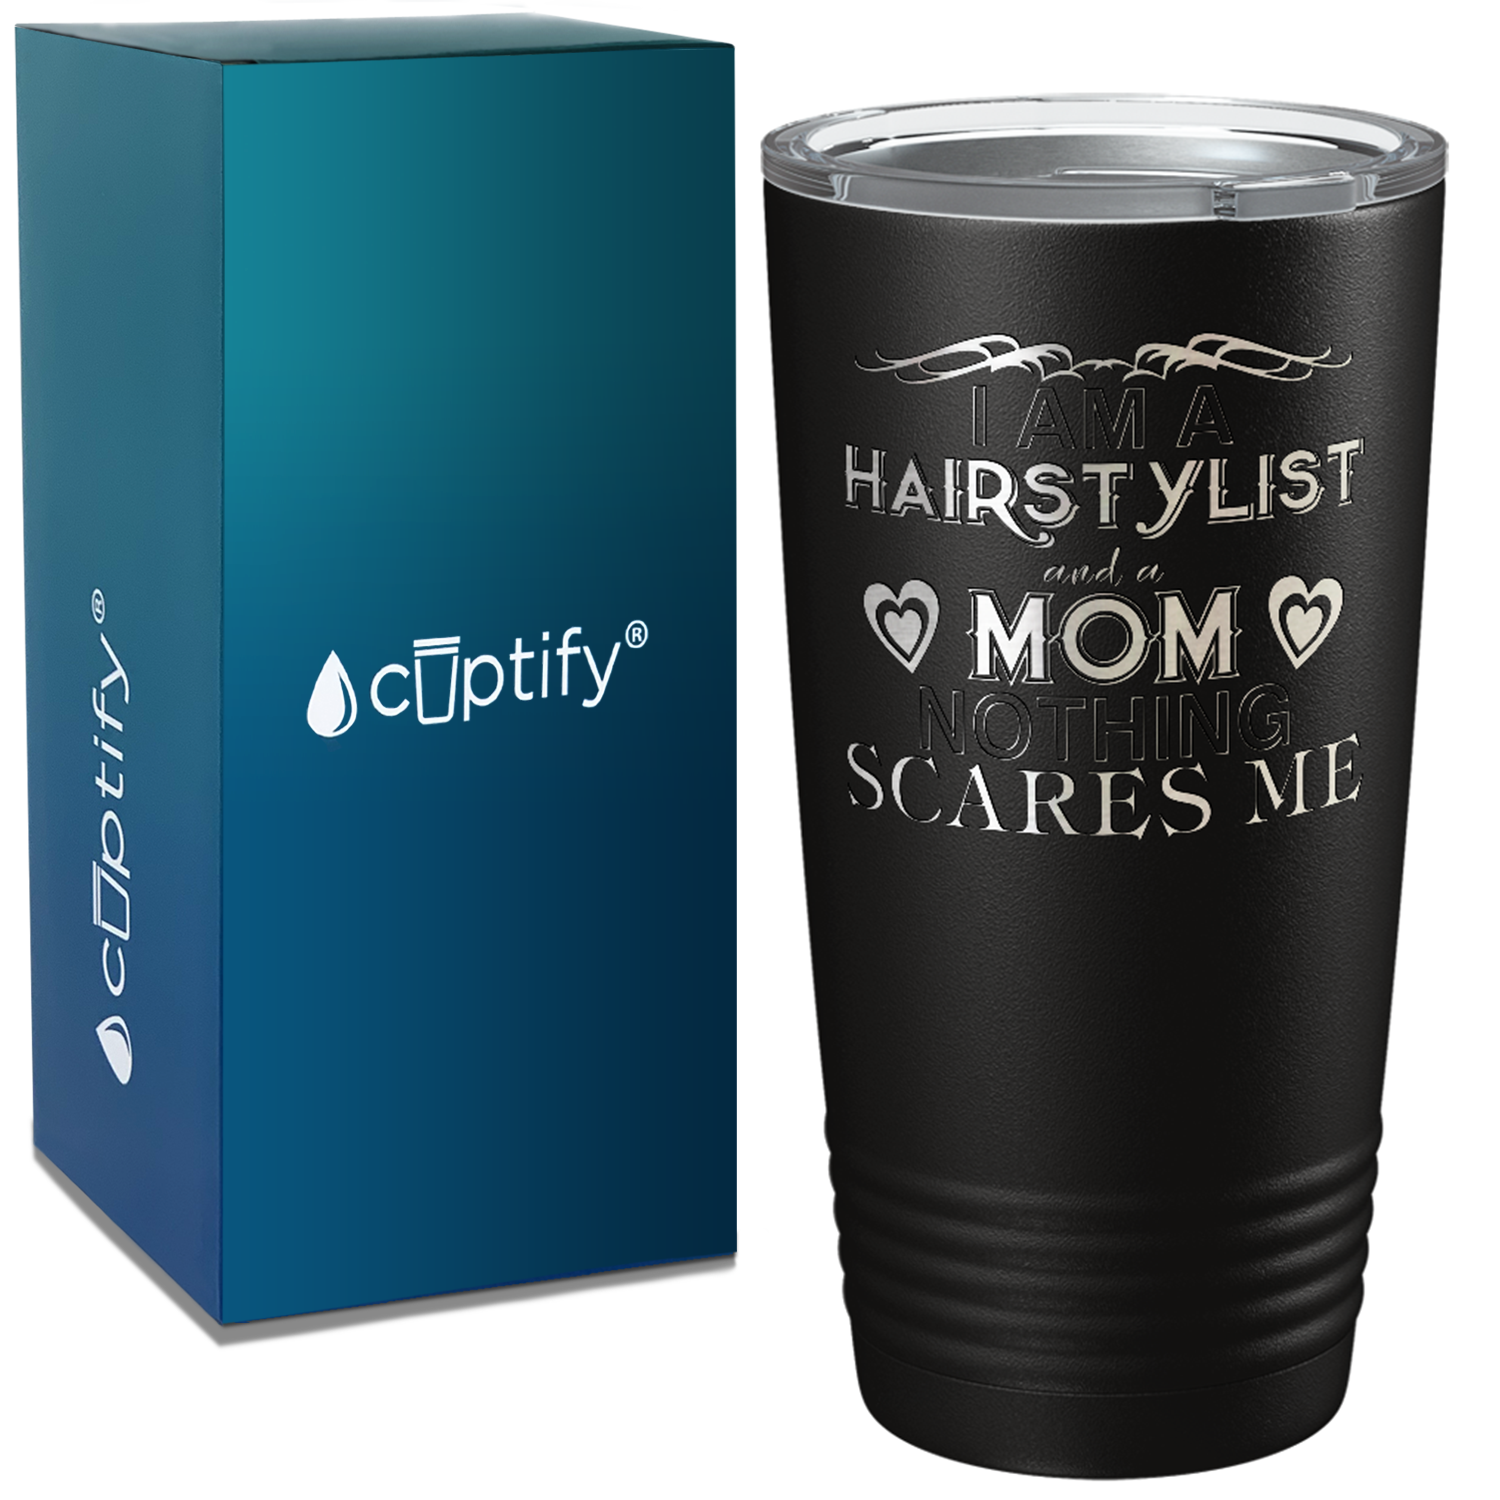 I Am A Hairstylist and a Mom Laser Engraved on Hairstylist 20oz Tumbler